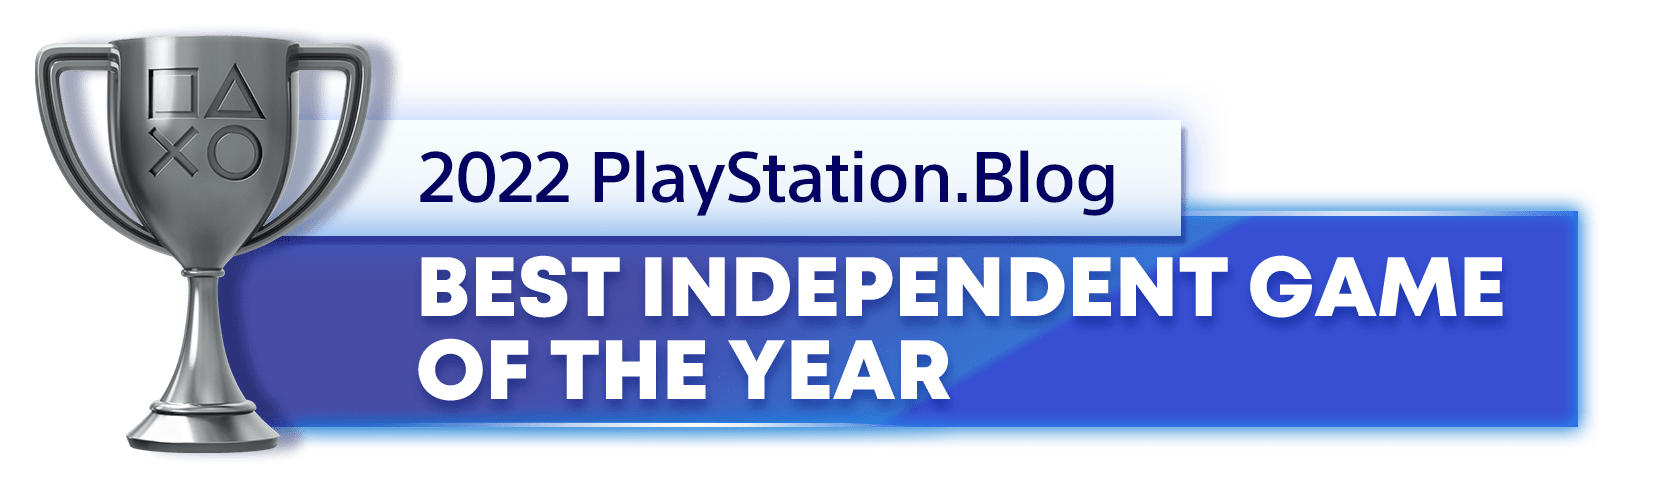 Game of the Year 2022 – Overall Winner